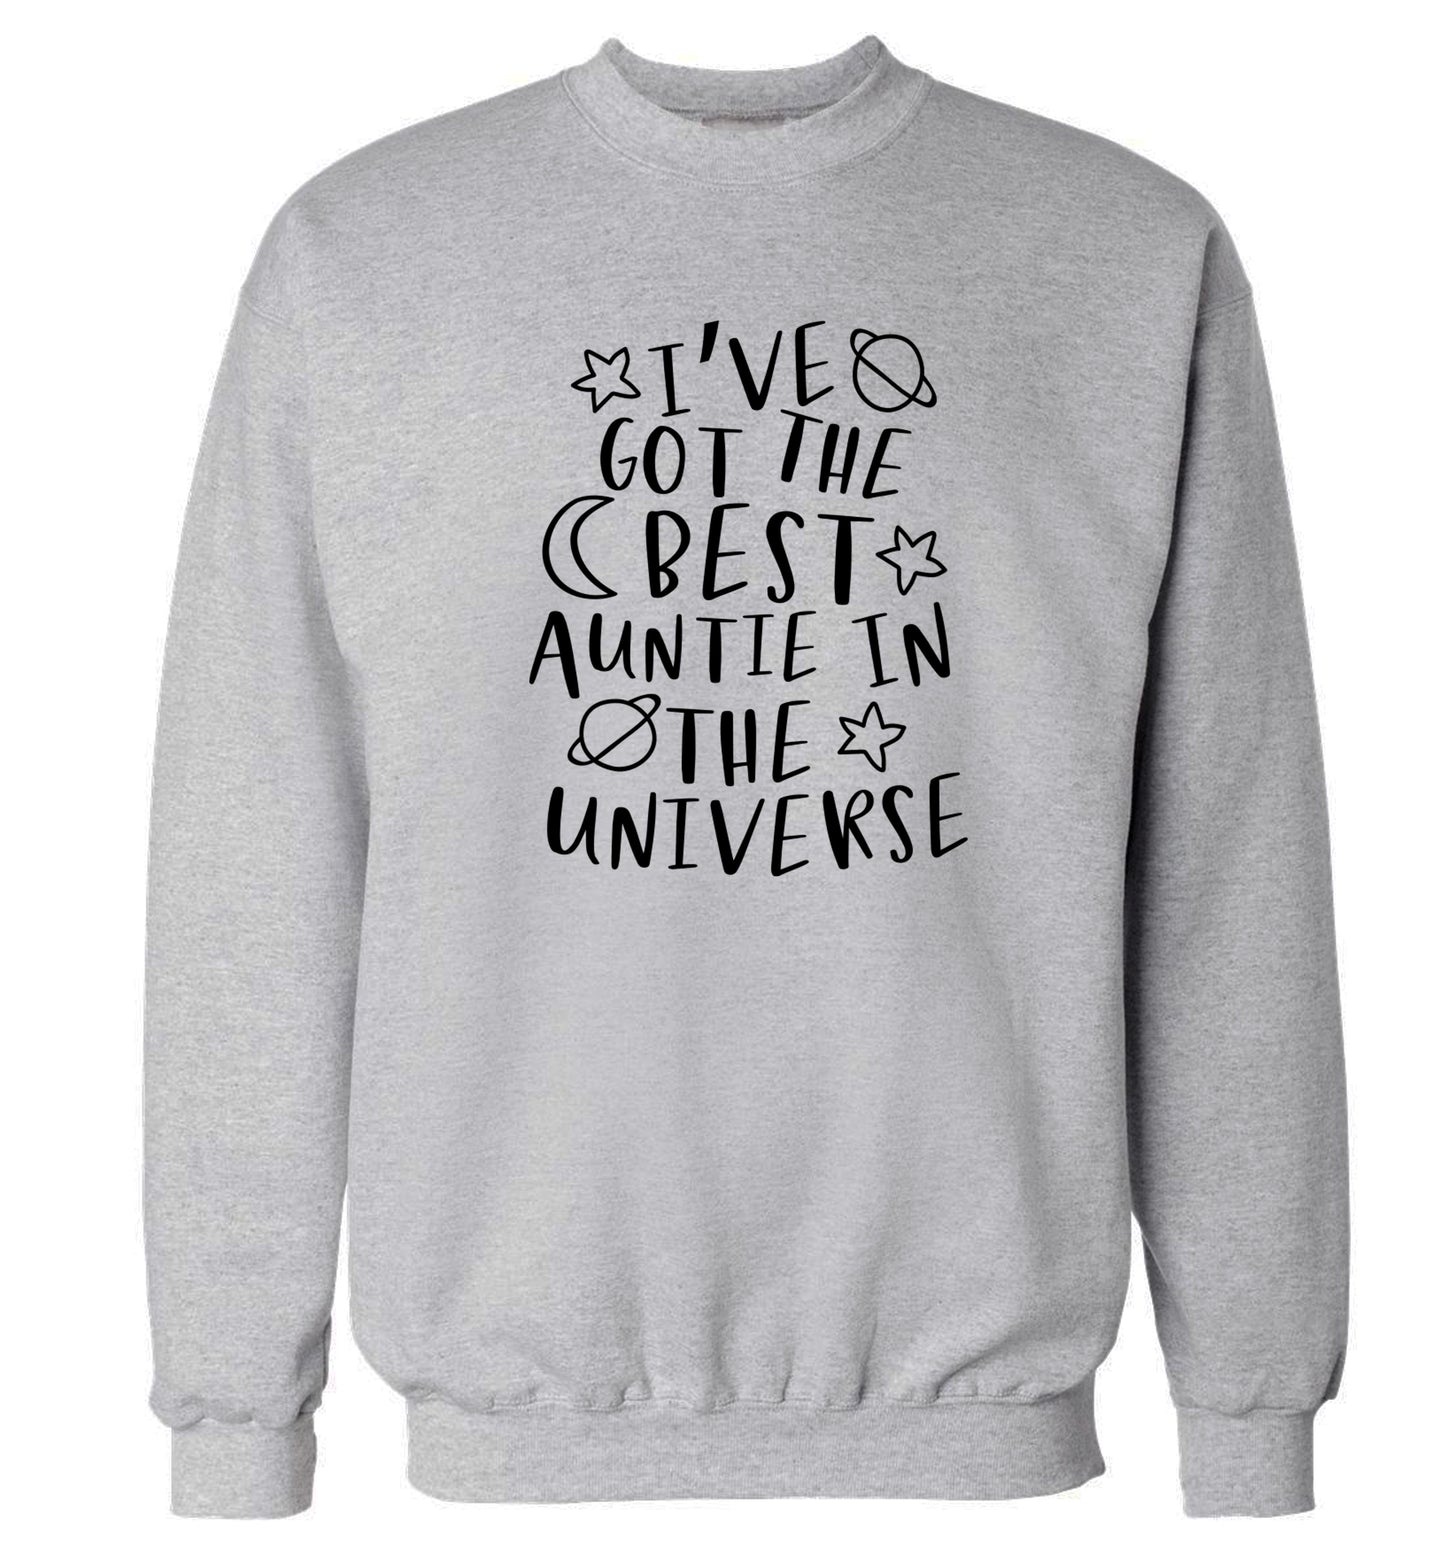 I've got the best auntie in the universe Adult's unisex grey Sweater 2XL